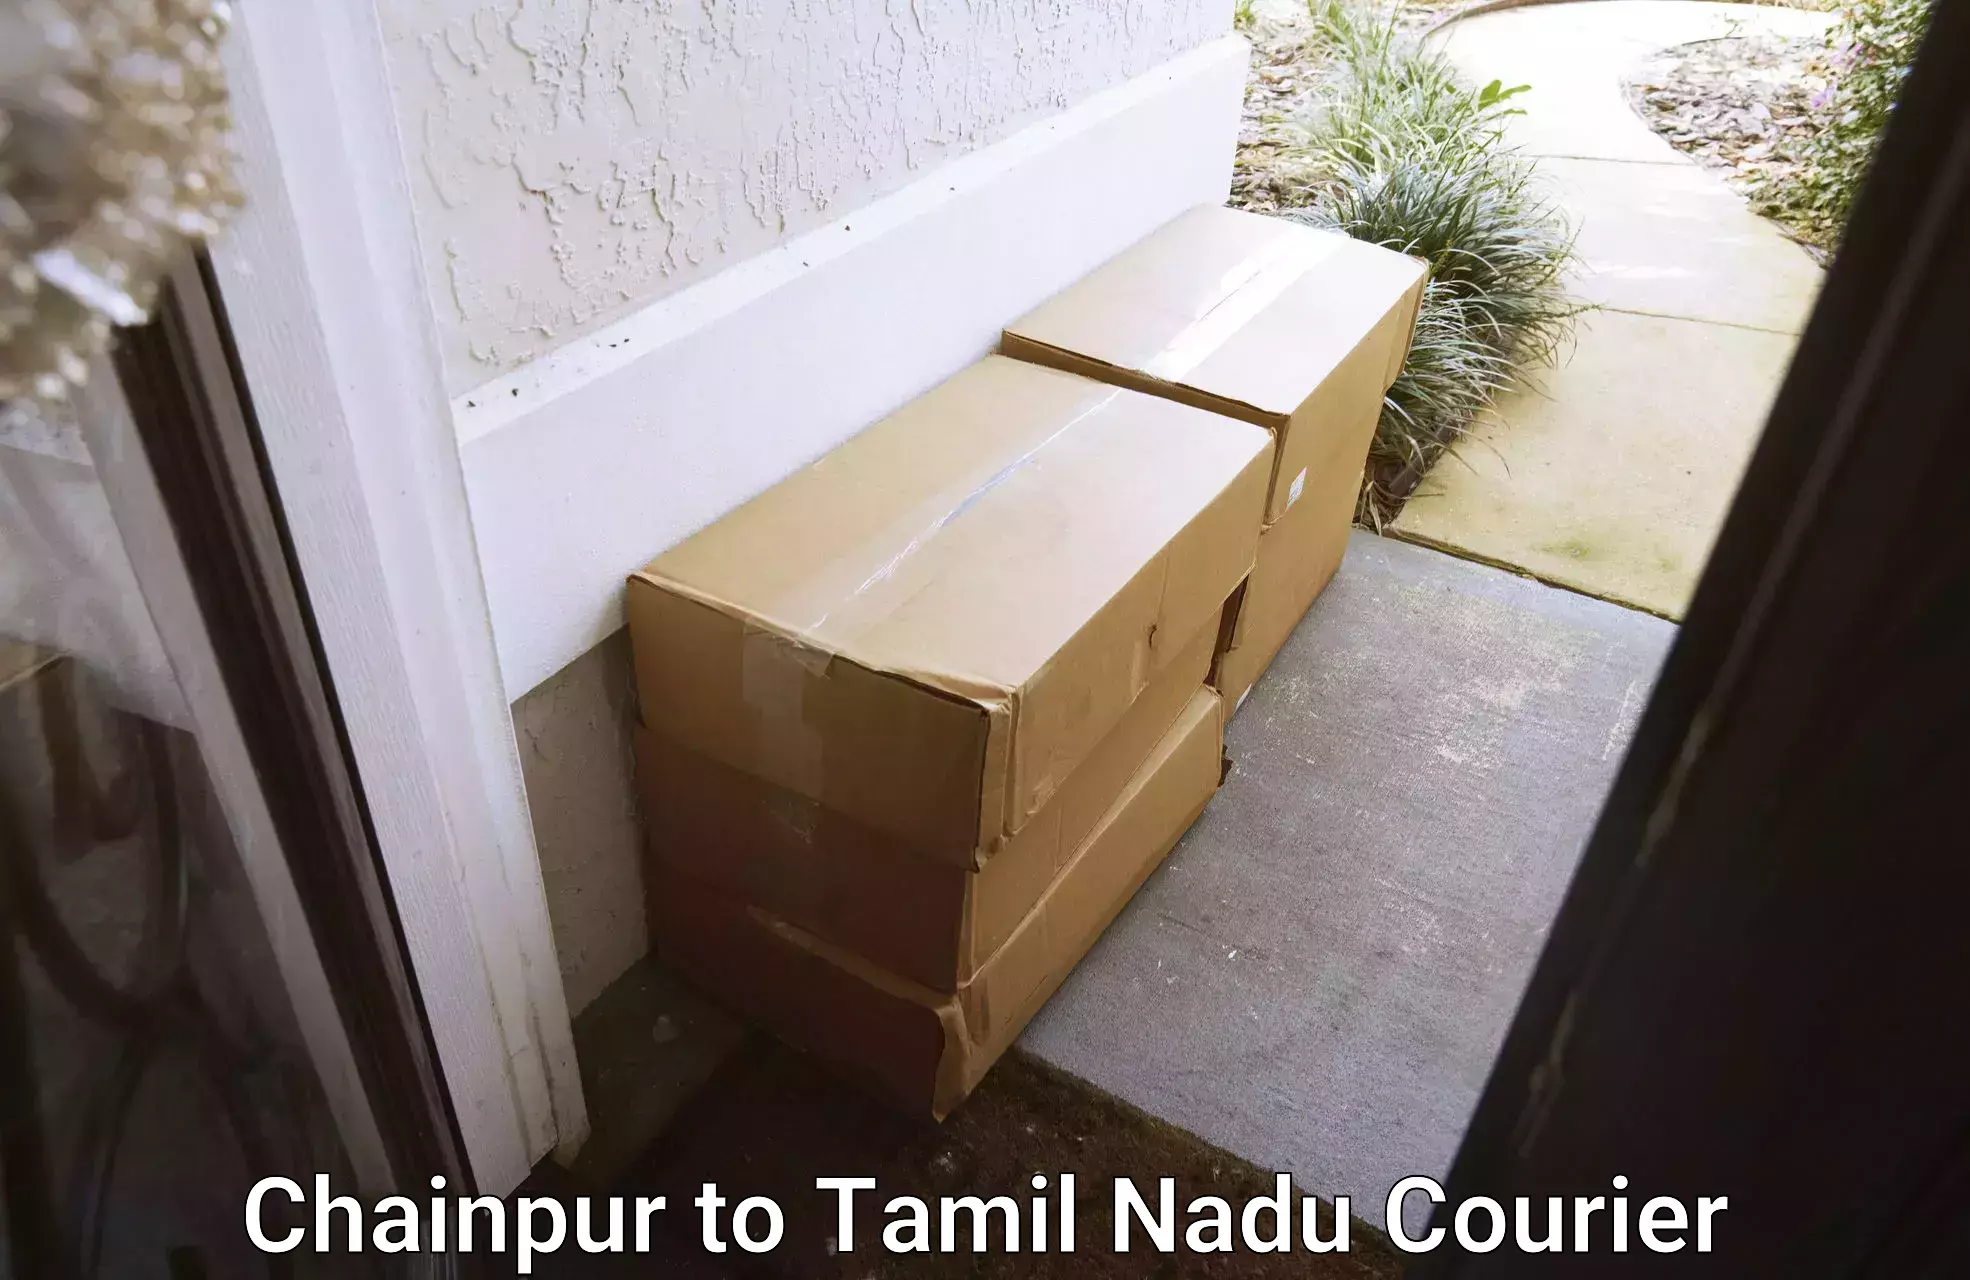 Full-service relocation Chainpur to Tamil Nadu